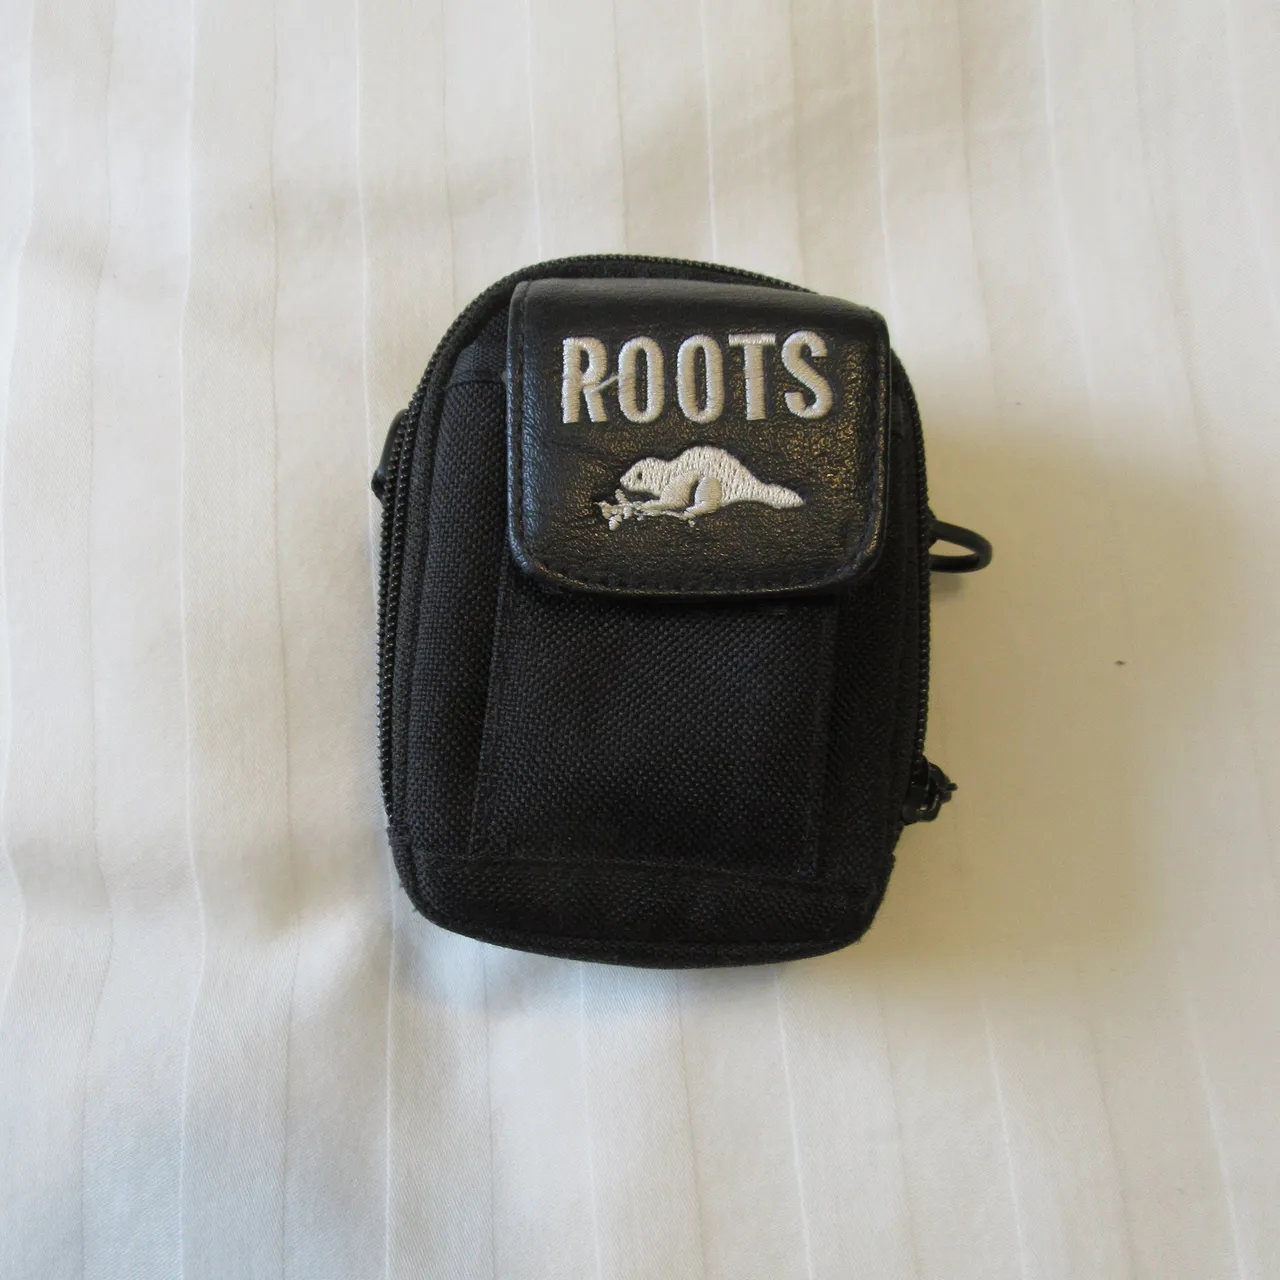 Roots camera case photo 1